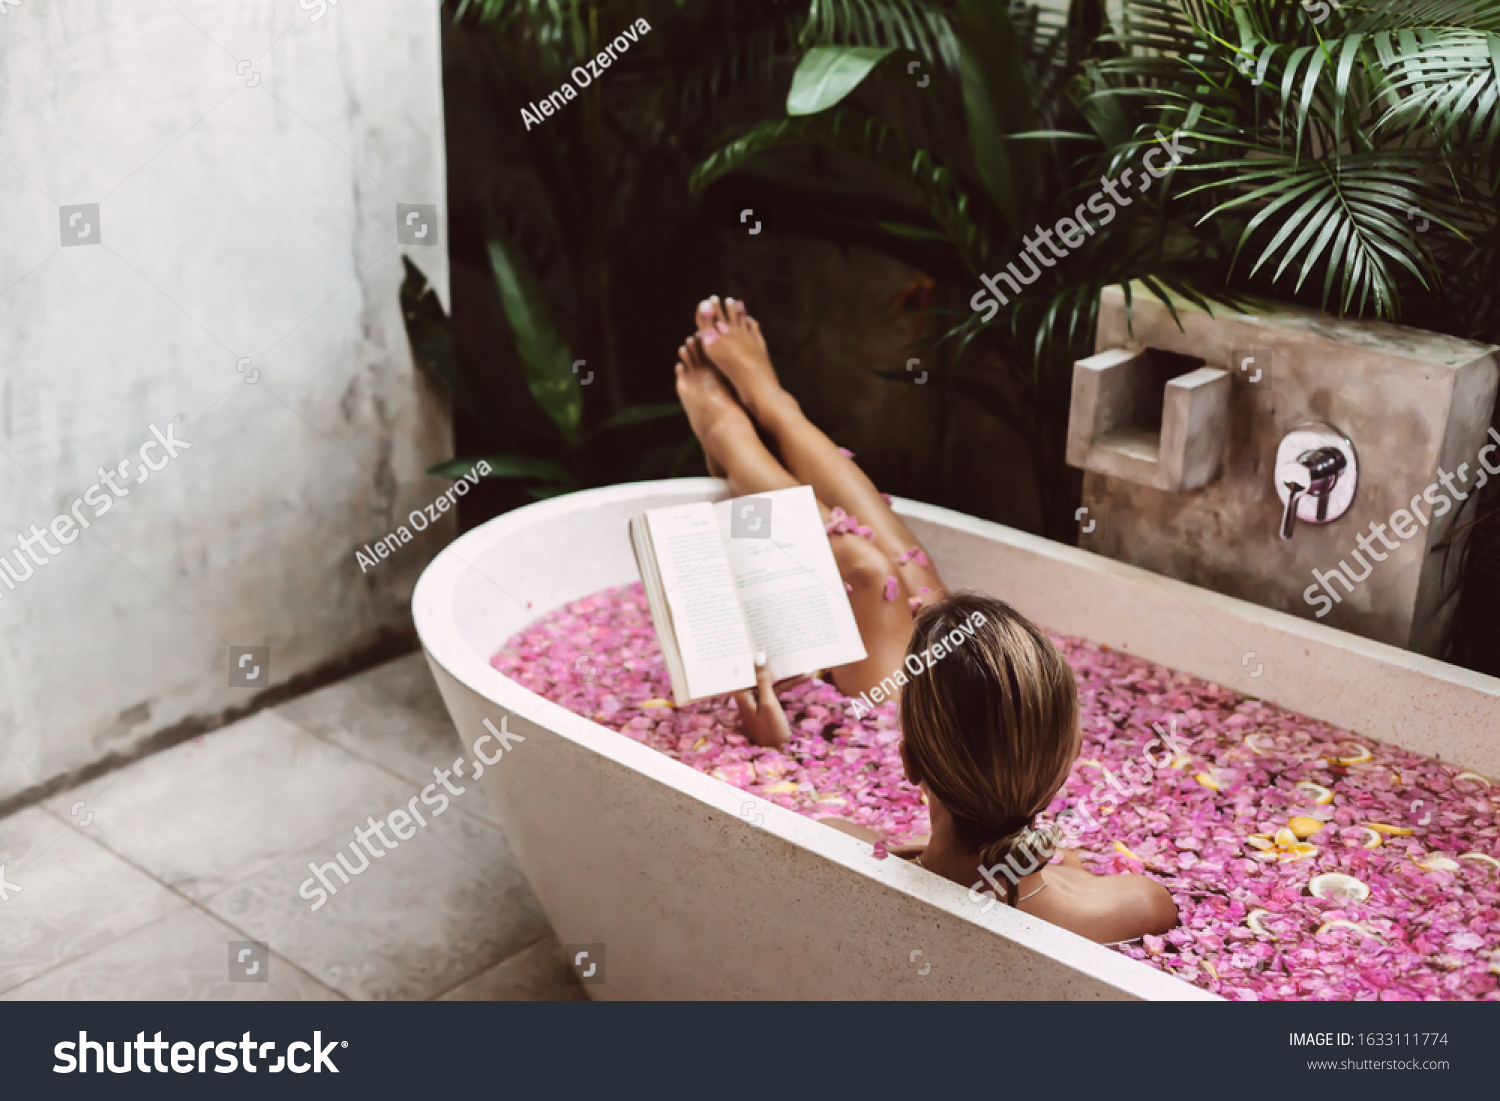 Woman reading book while relaxing in bath tub with flower petals. Organic spa relaxation in luxury Bali outdoor bath. #1633111774